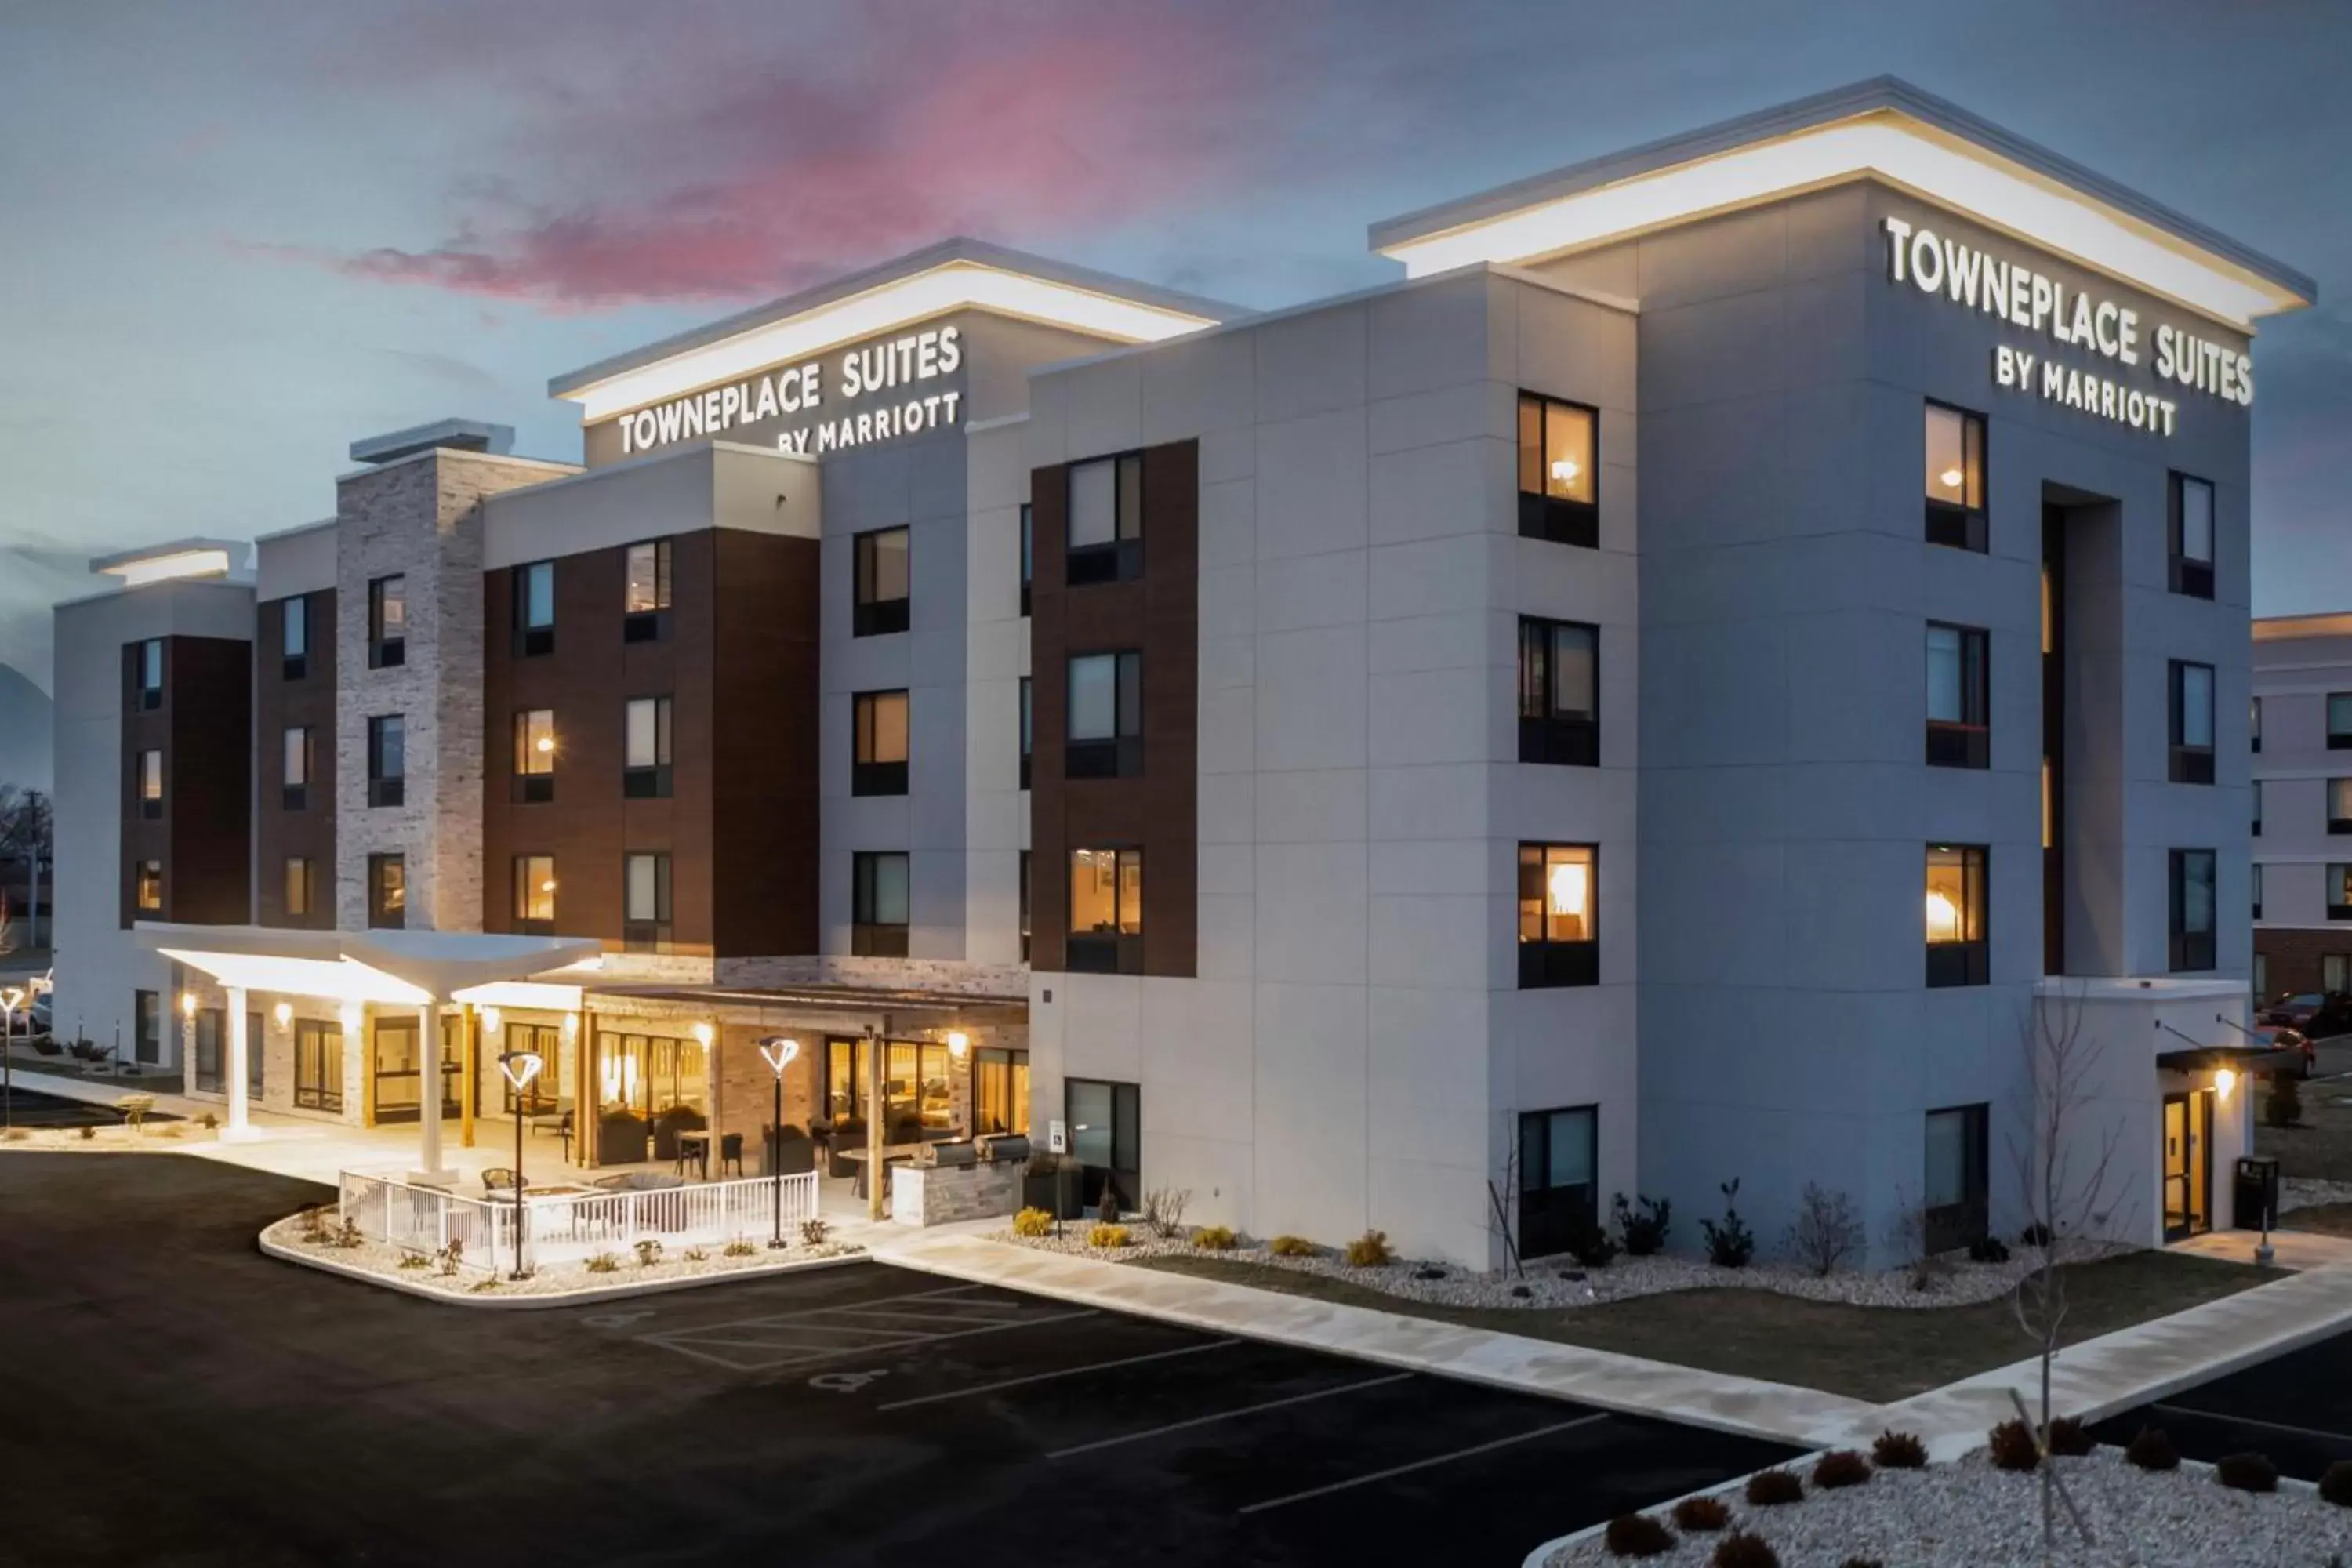 Property Building in TownePlace Suites by Marriott Sidney